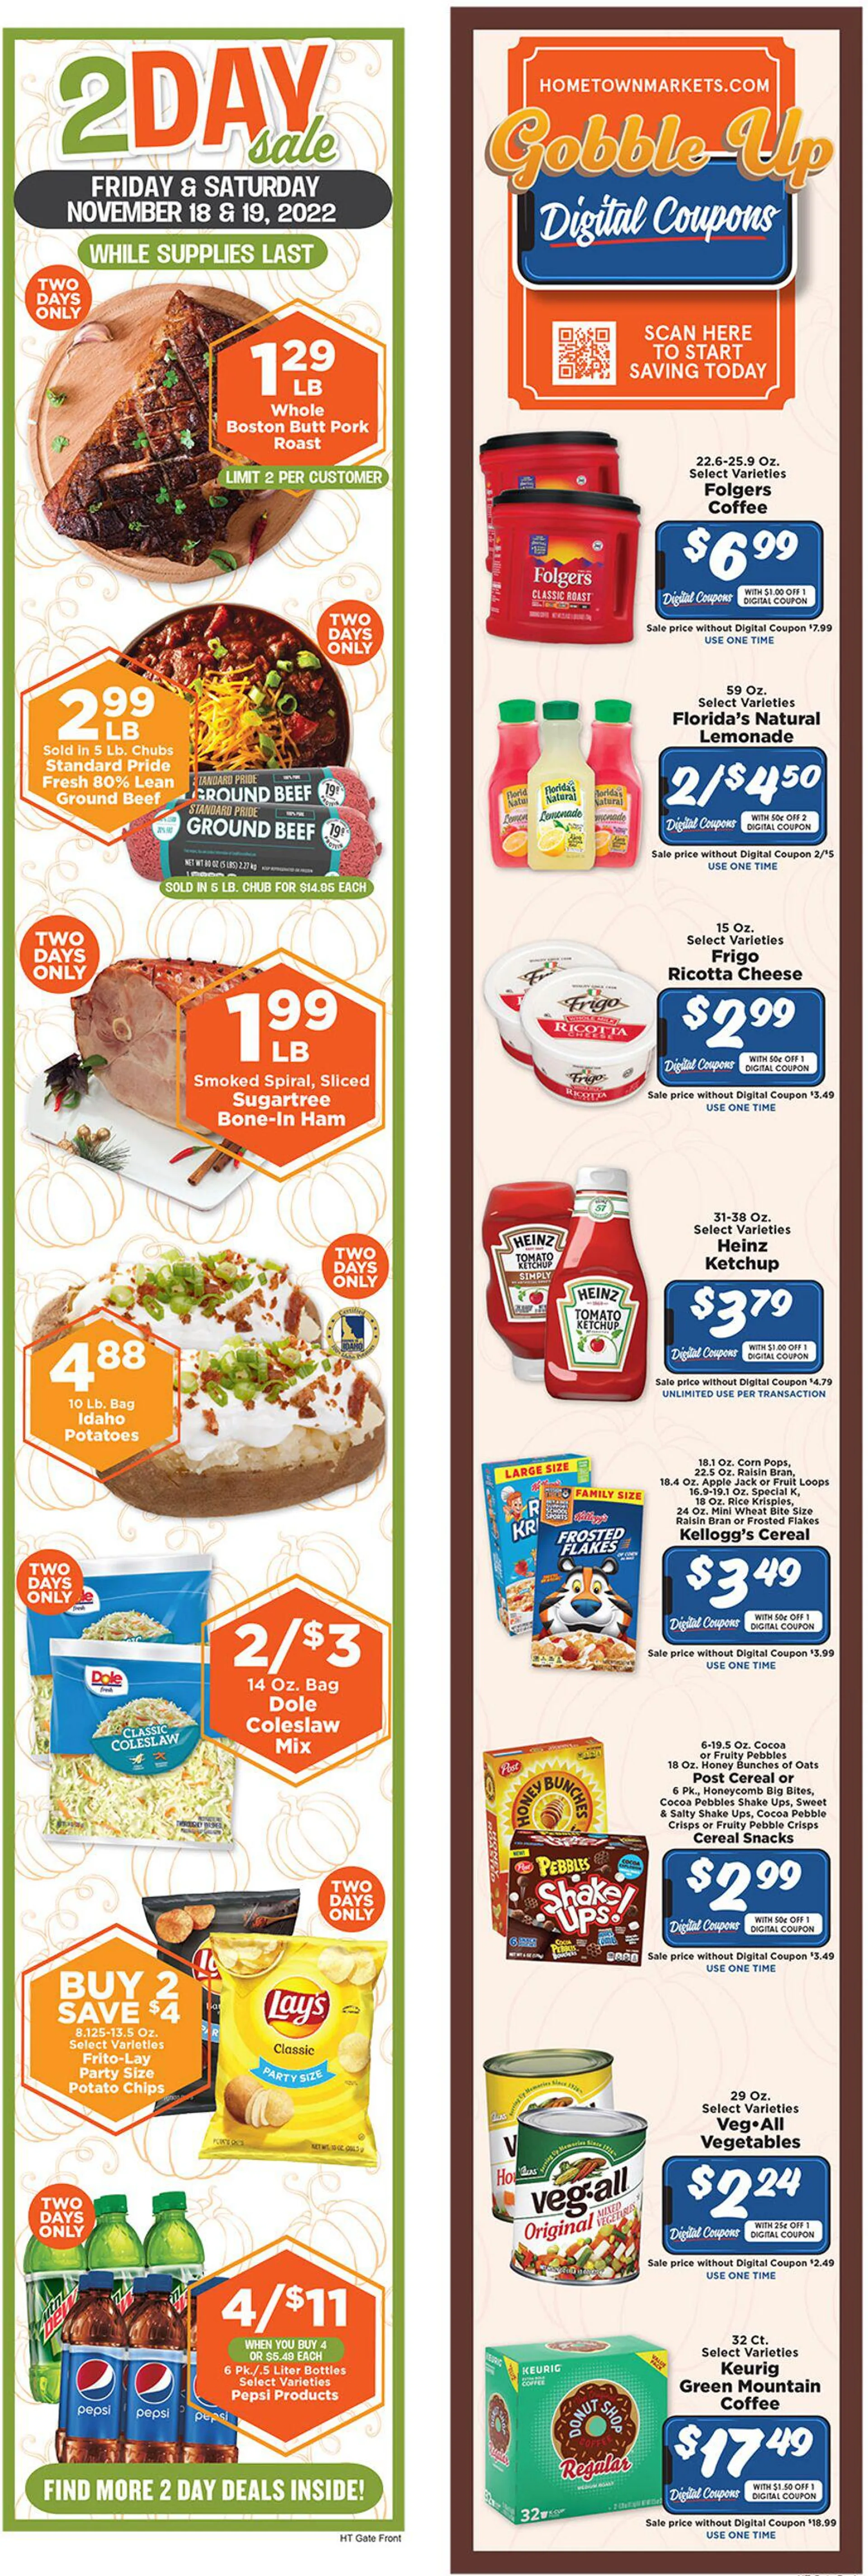 Hometown Market Current weekly ad - 7